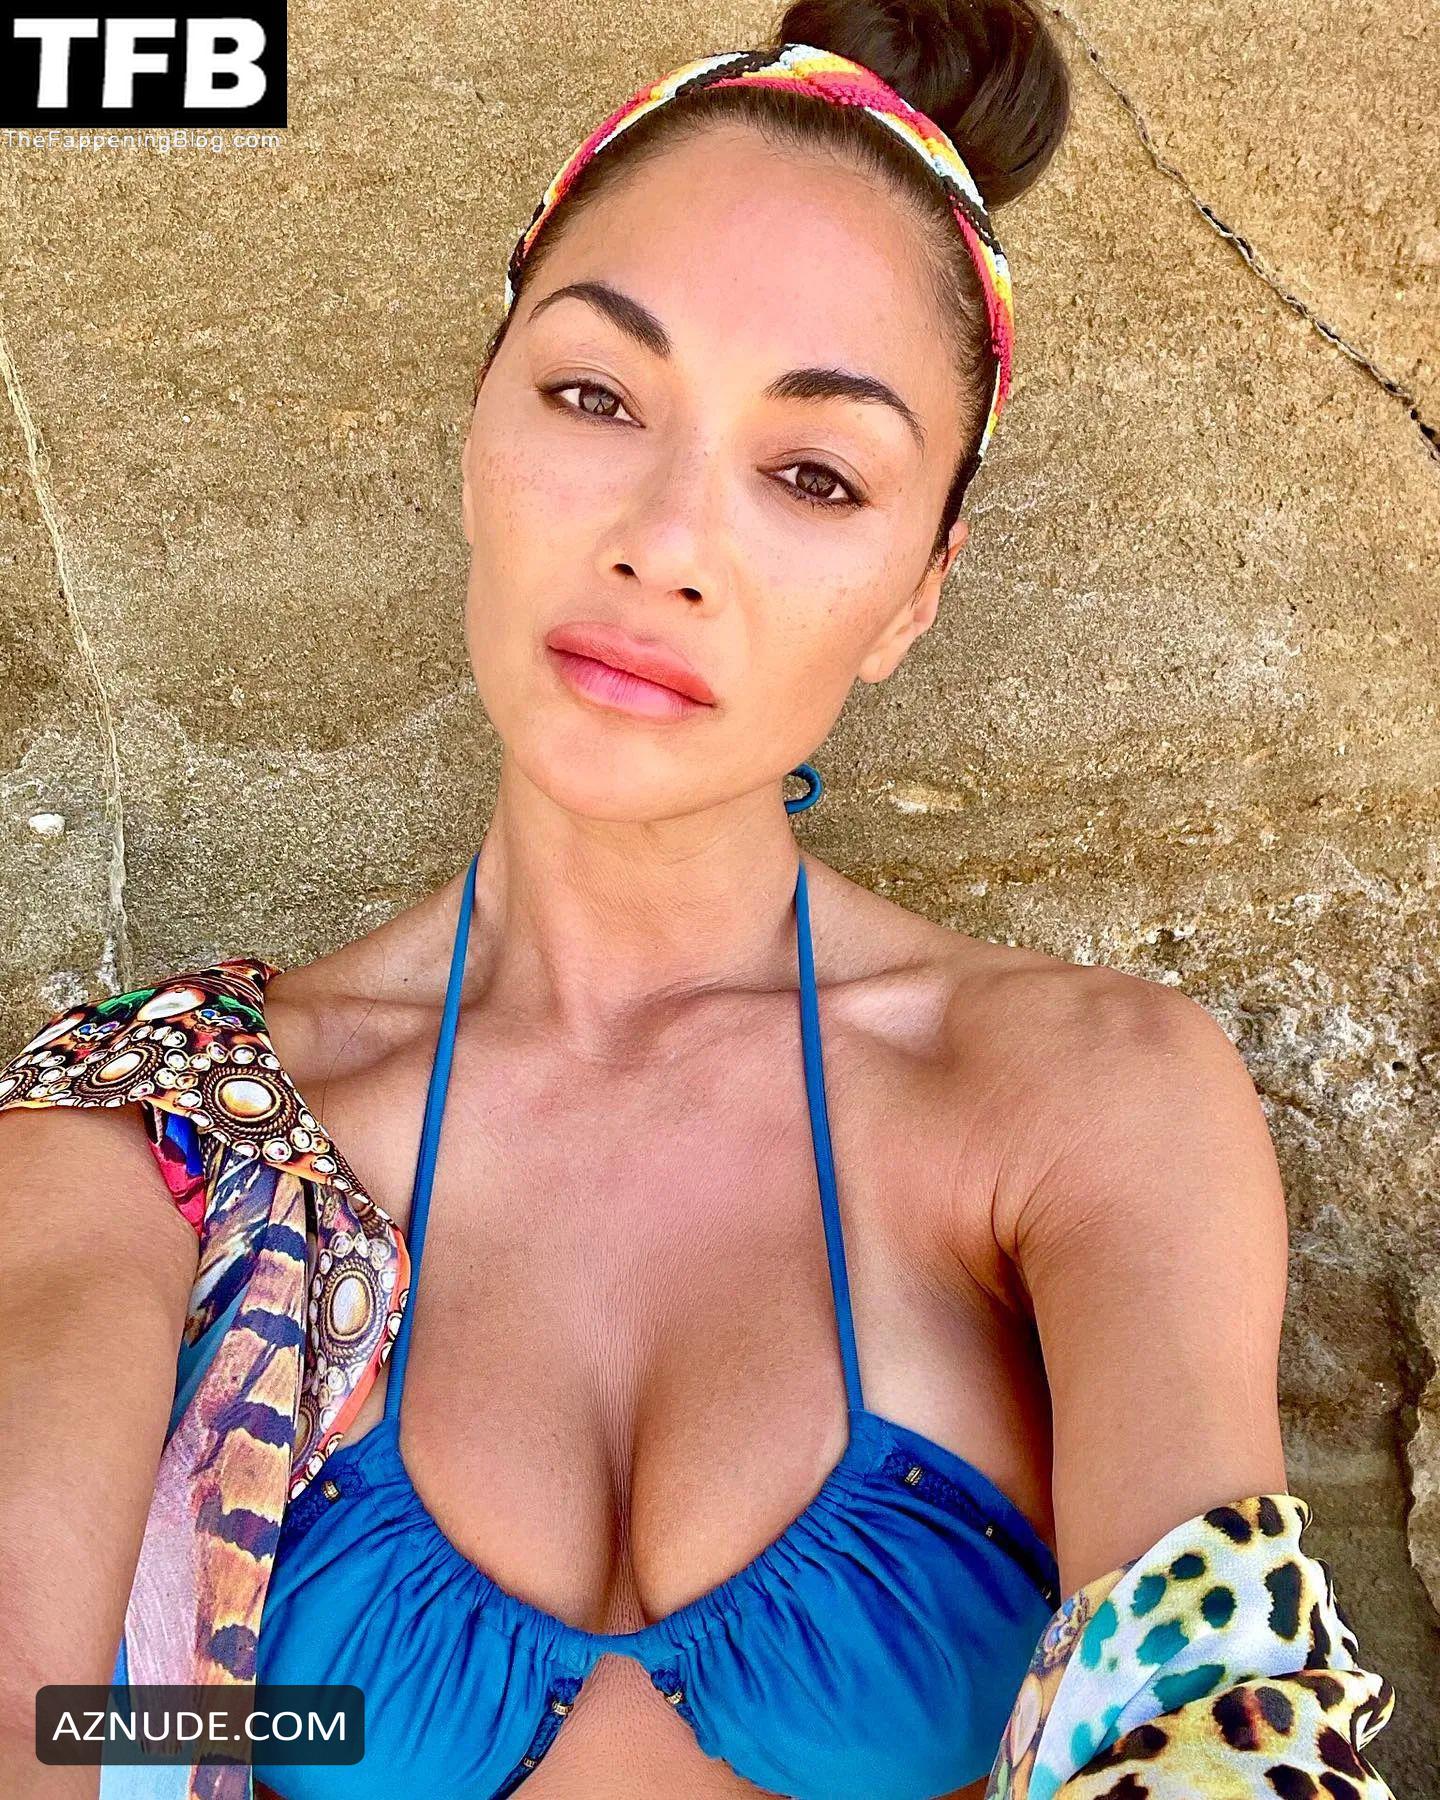 Nicole Scherzinger Sexy Poses Showing Off Her Hot Tits In A Selfie On Social Media Aznude